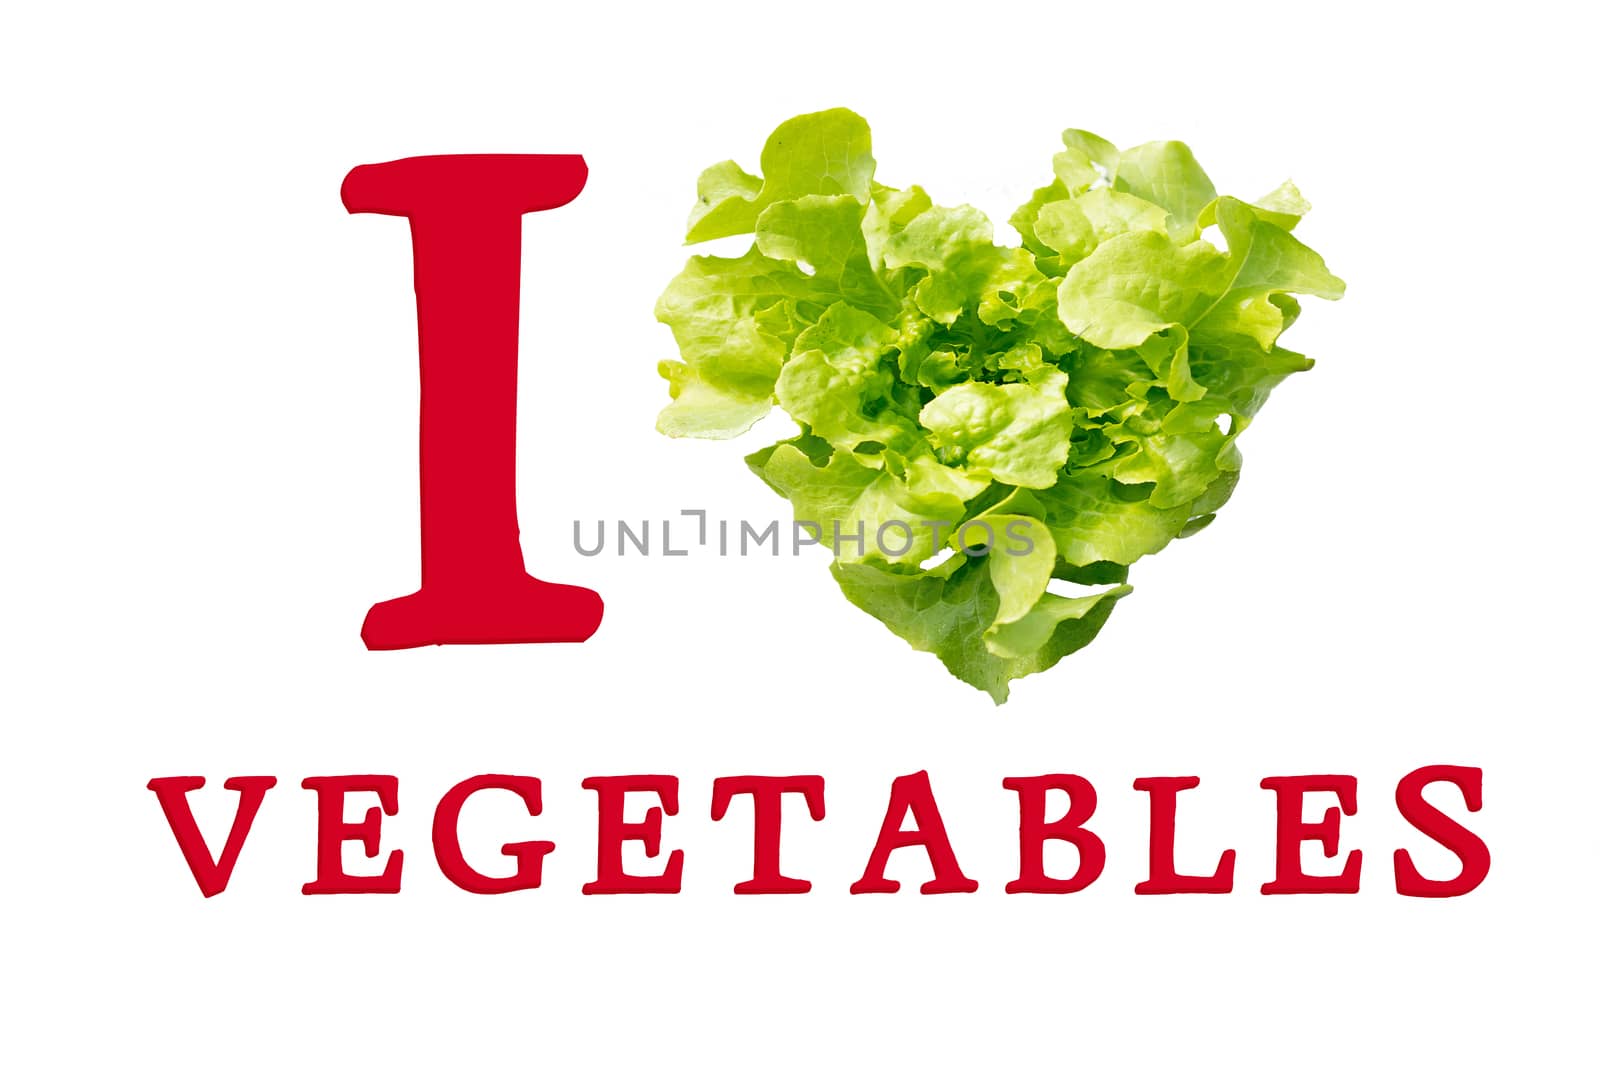 I love vegetables. Heart symbol. Vegetables diet concept. Food photography of heart made from vegetables isolated white background. High resolution product by asiandelight